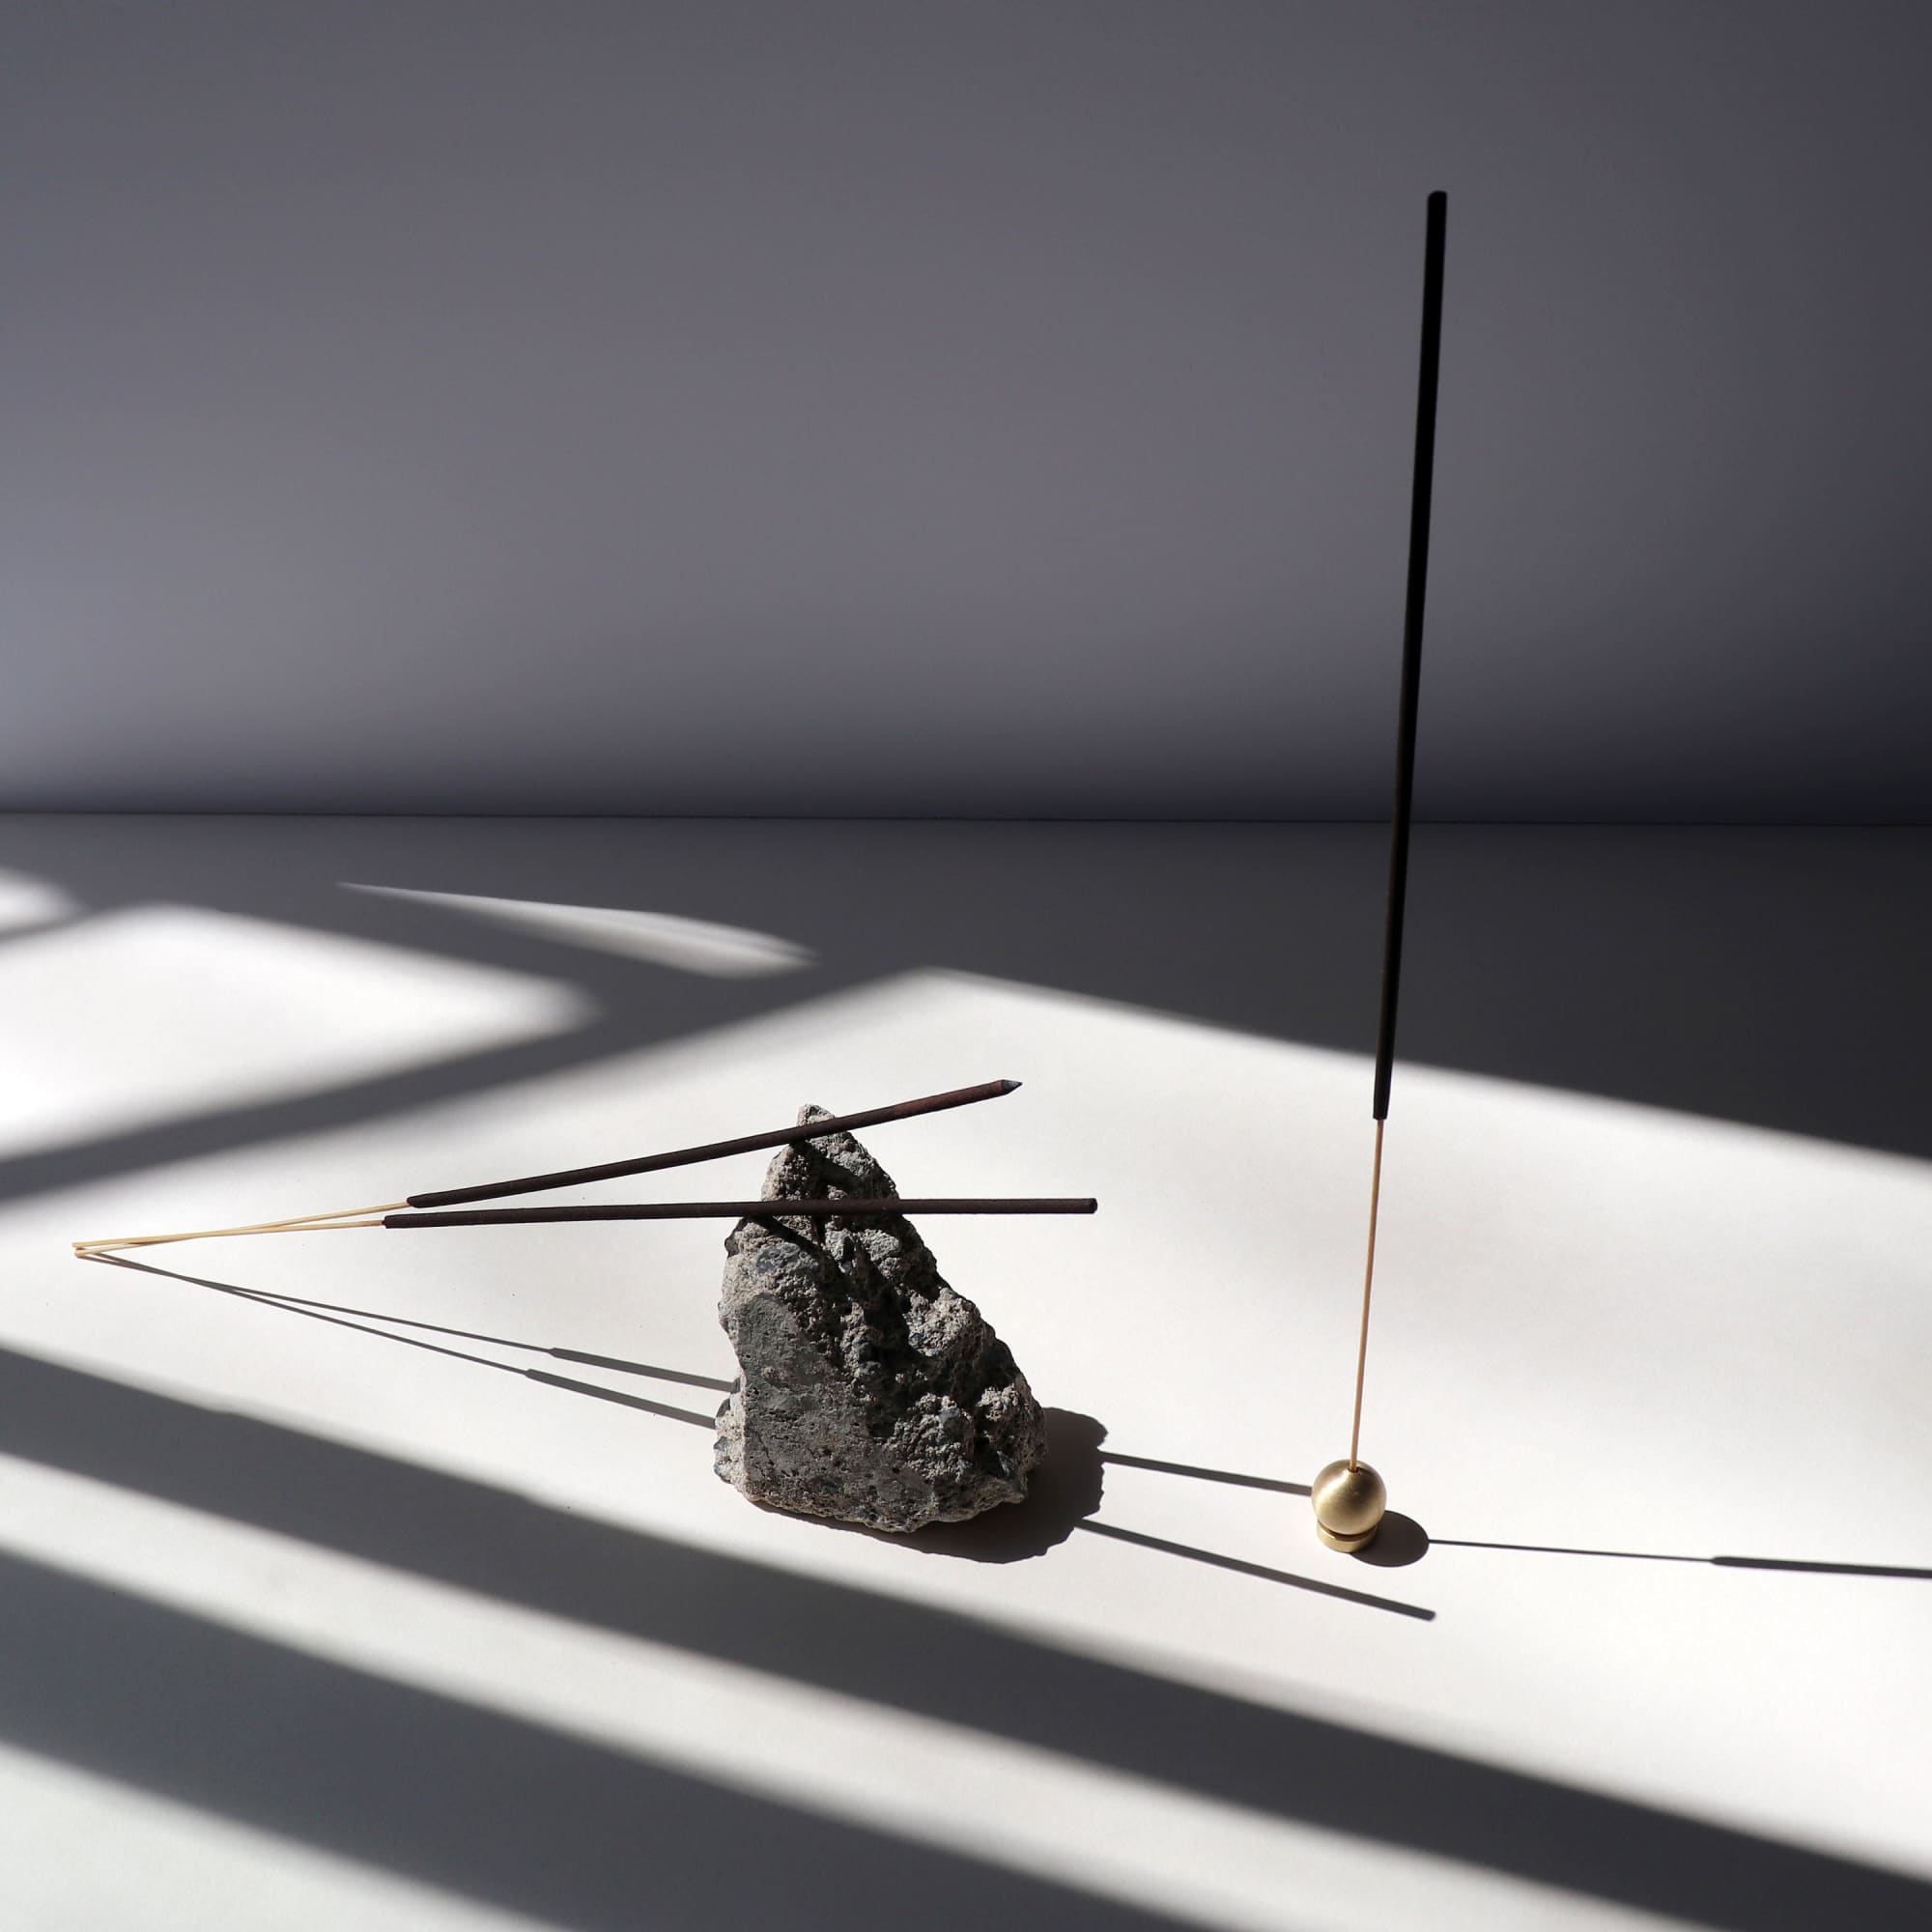 An incense stick in an incense holder